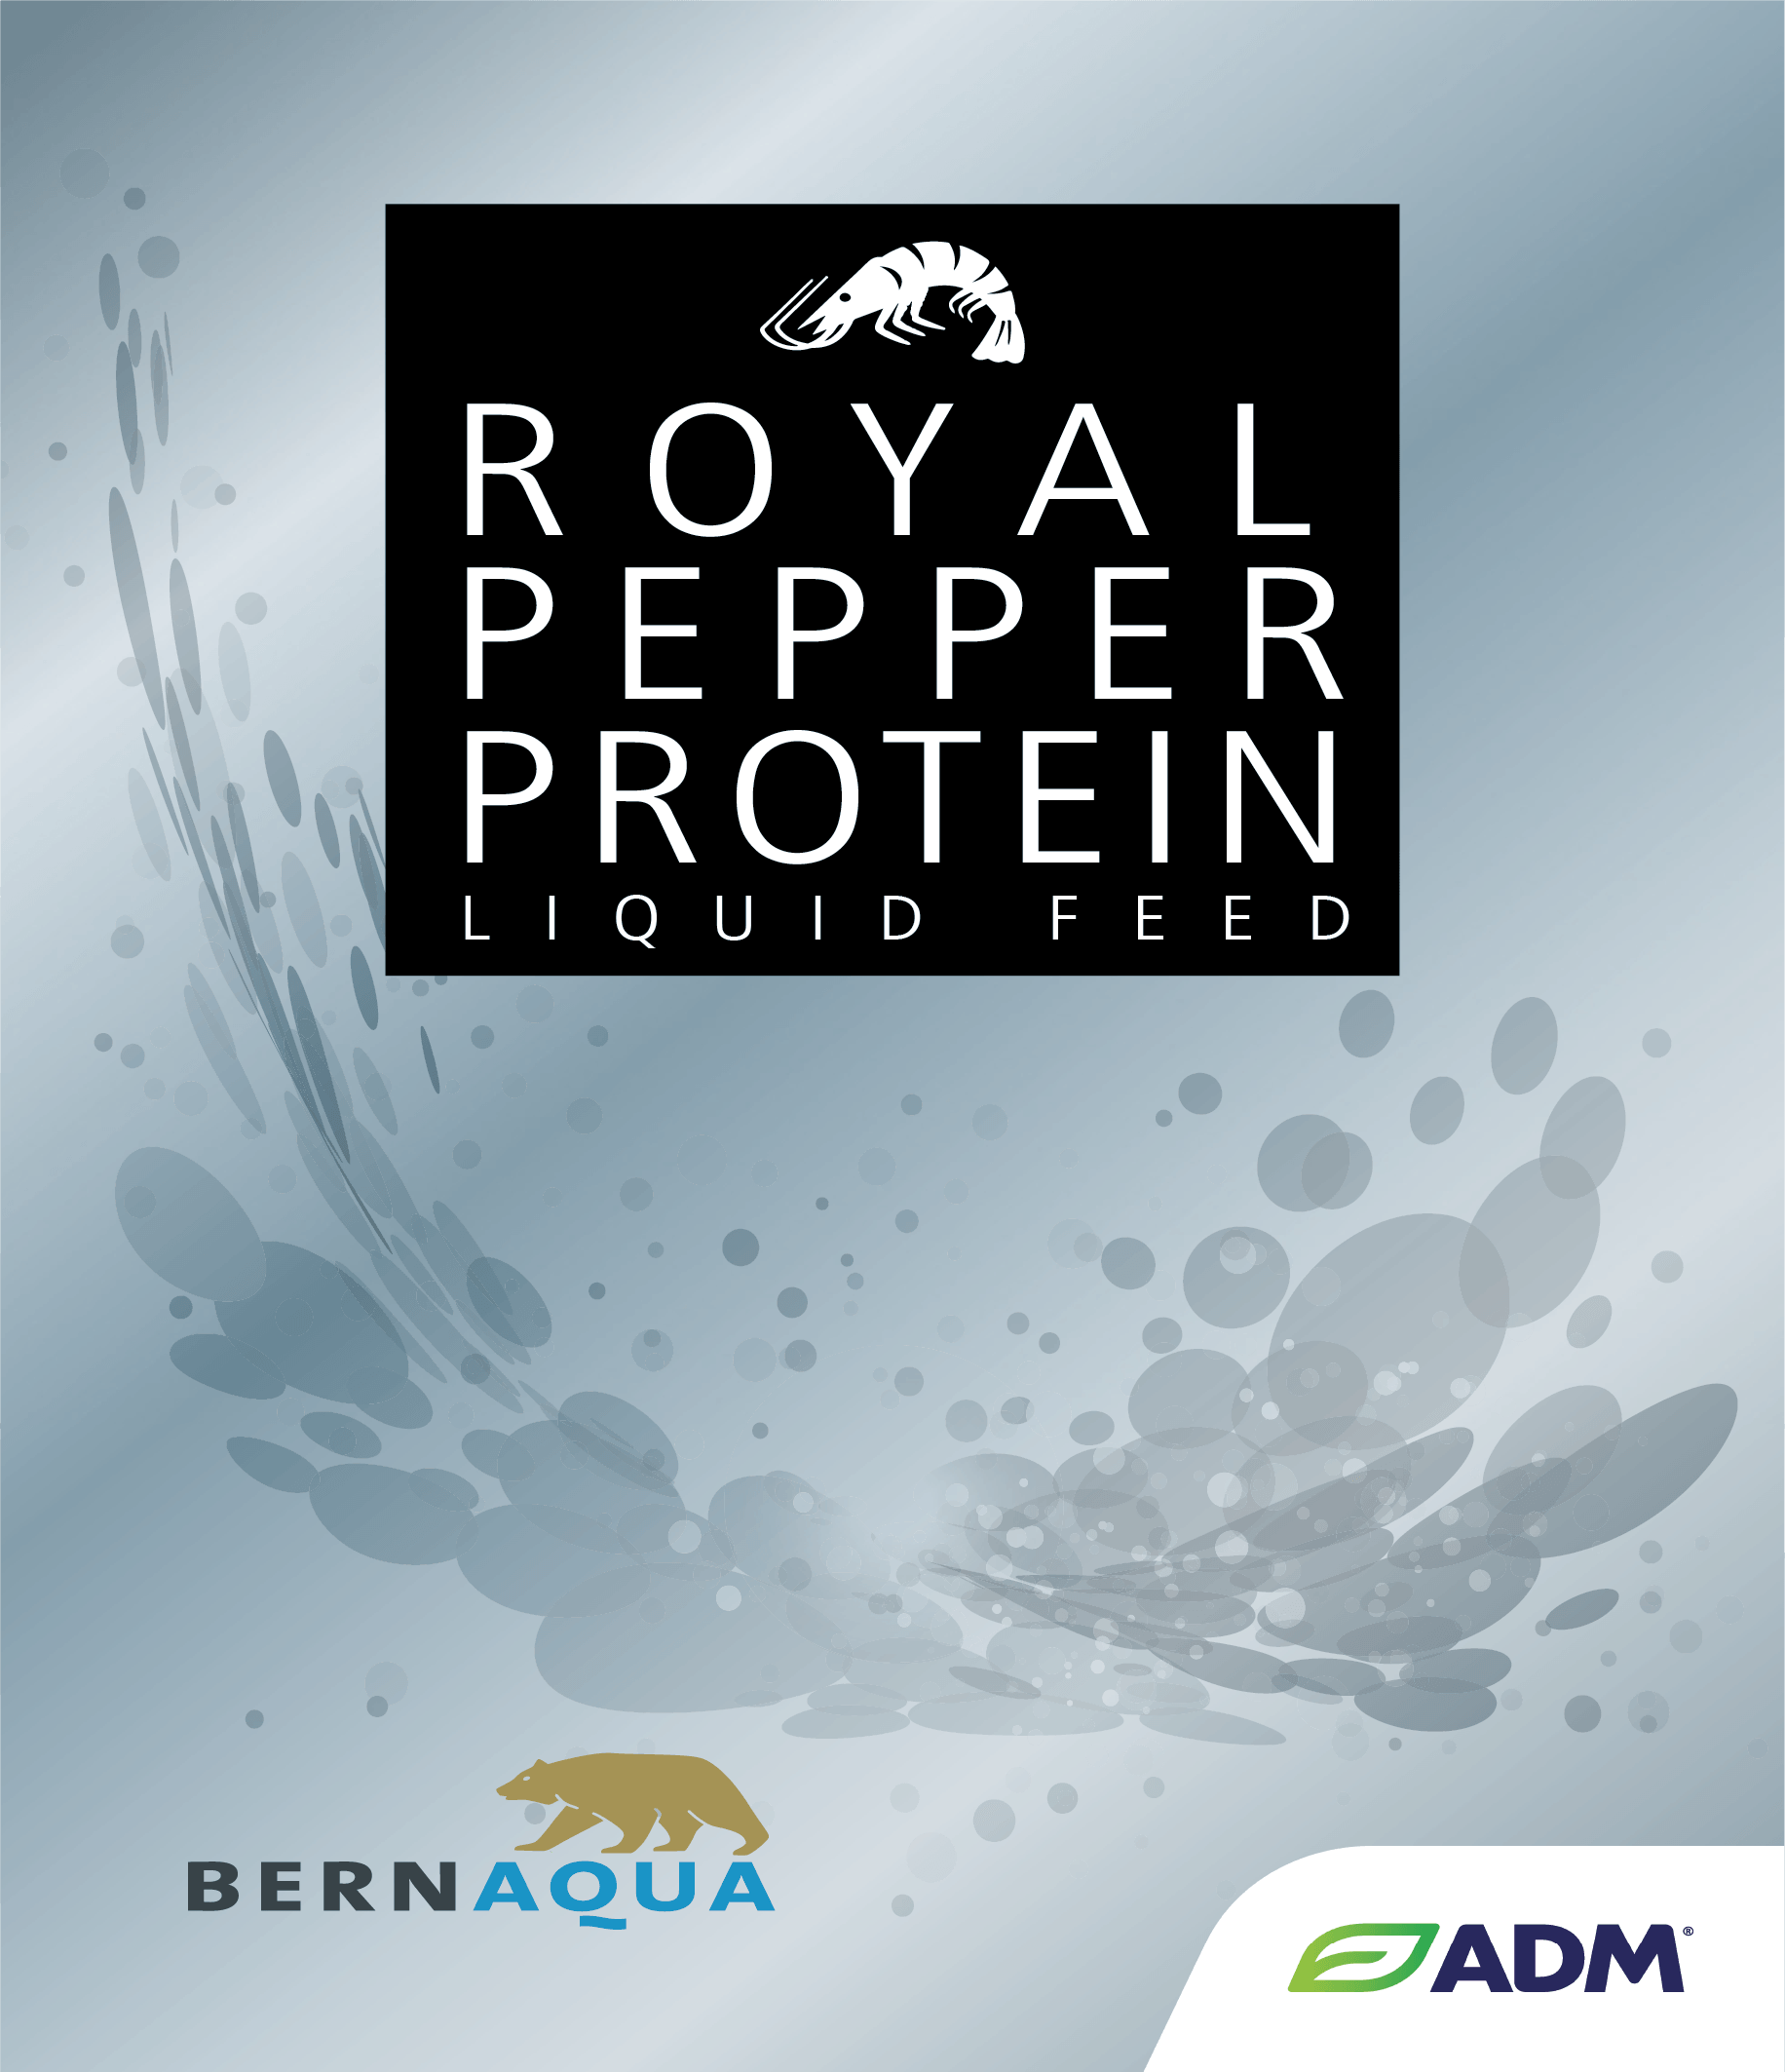 Royal Pepper Protein by BernAqua